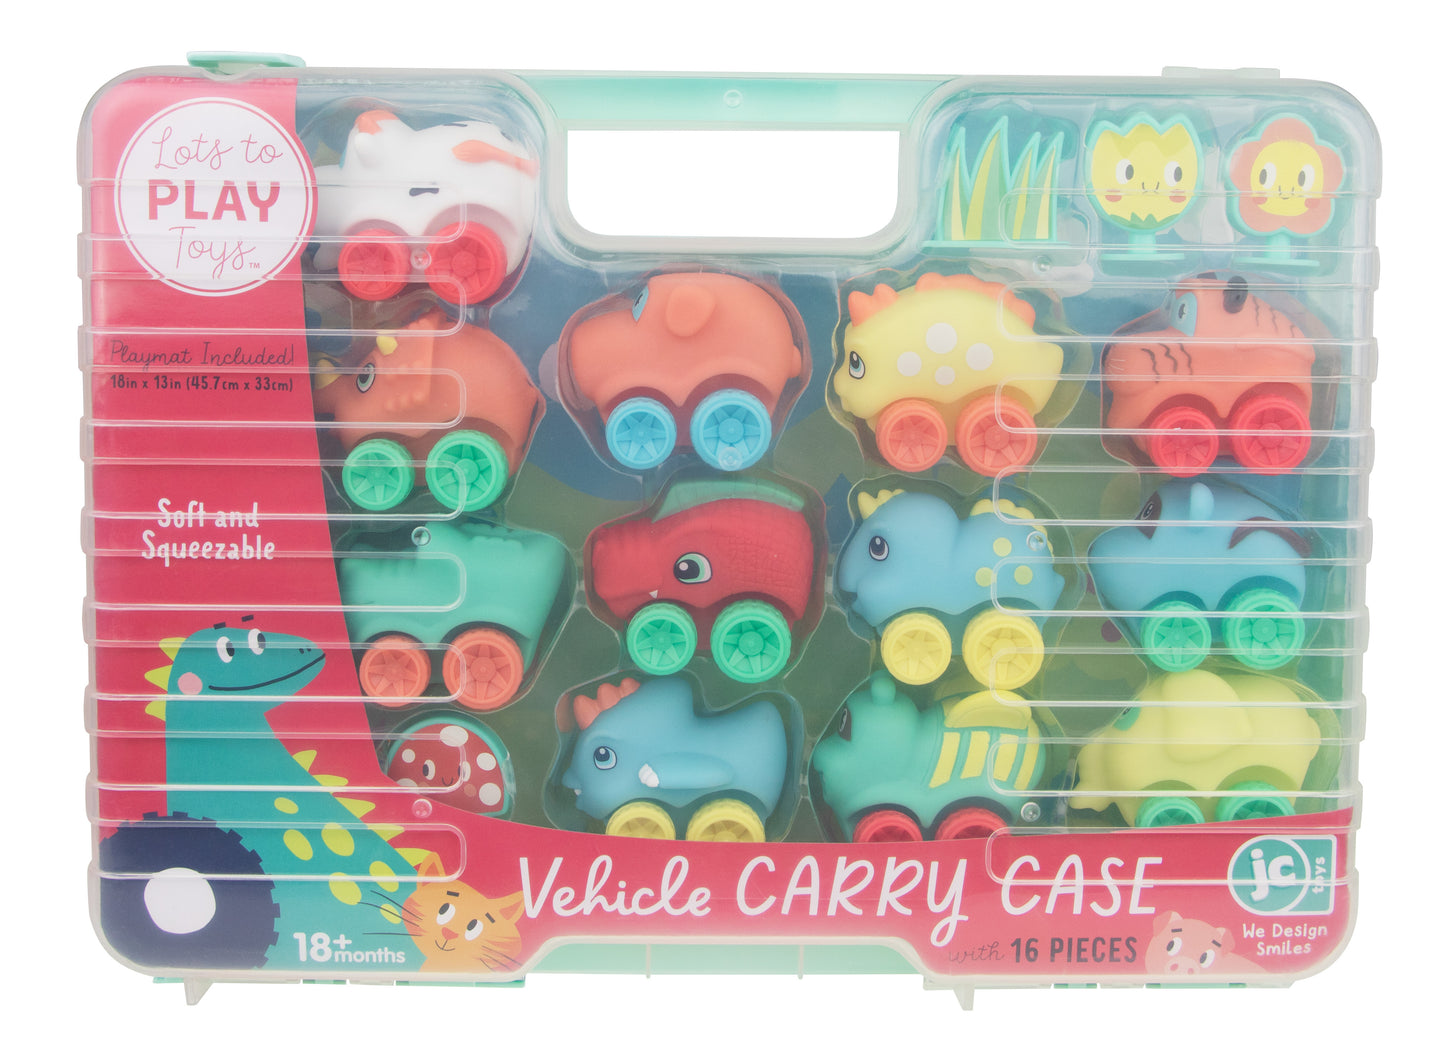 Lots to Play Toys ® Animal Cars Carry Case Gift Set.